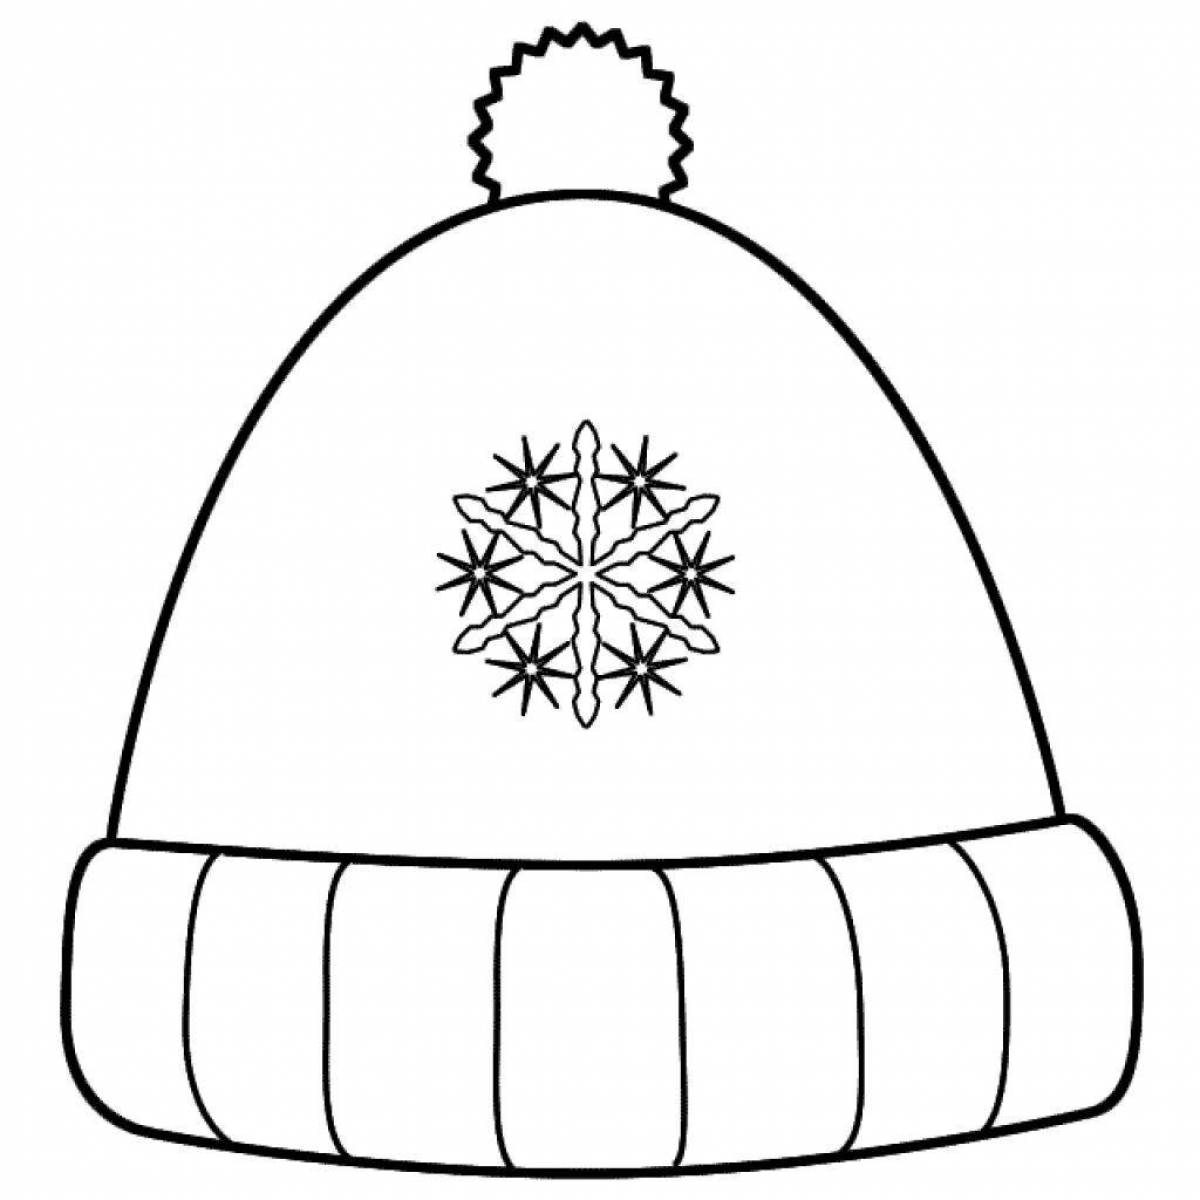 Comic hat and mittens coloring book